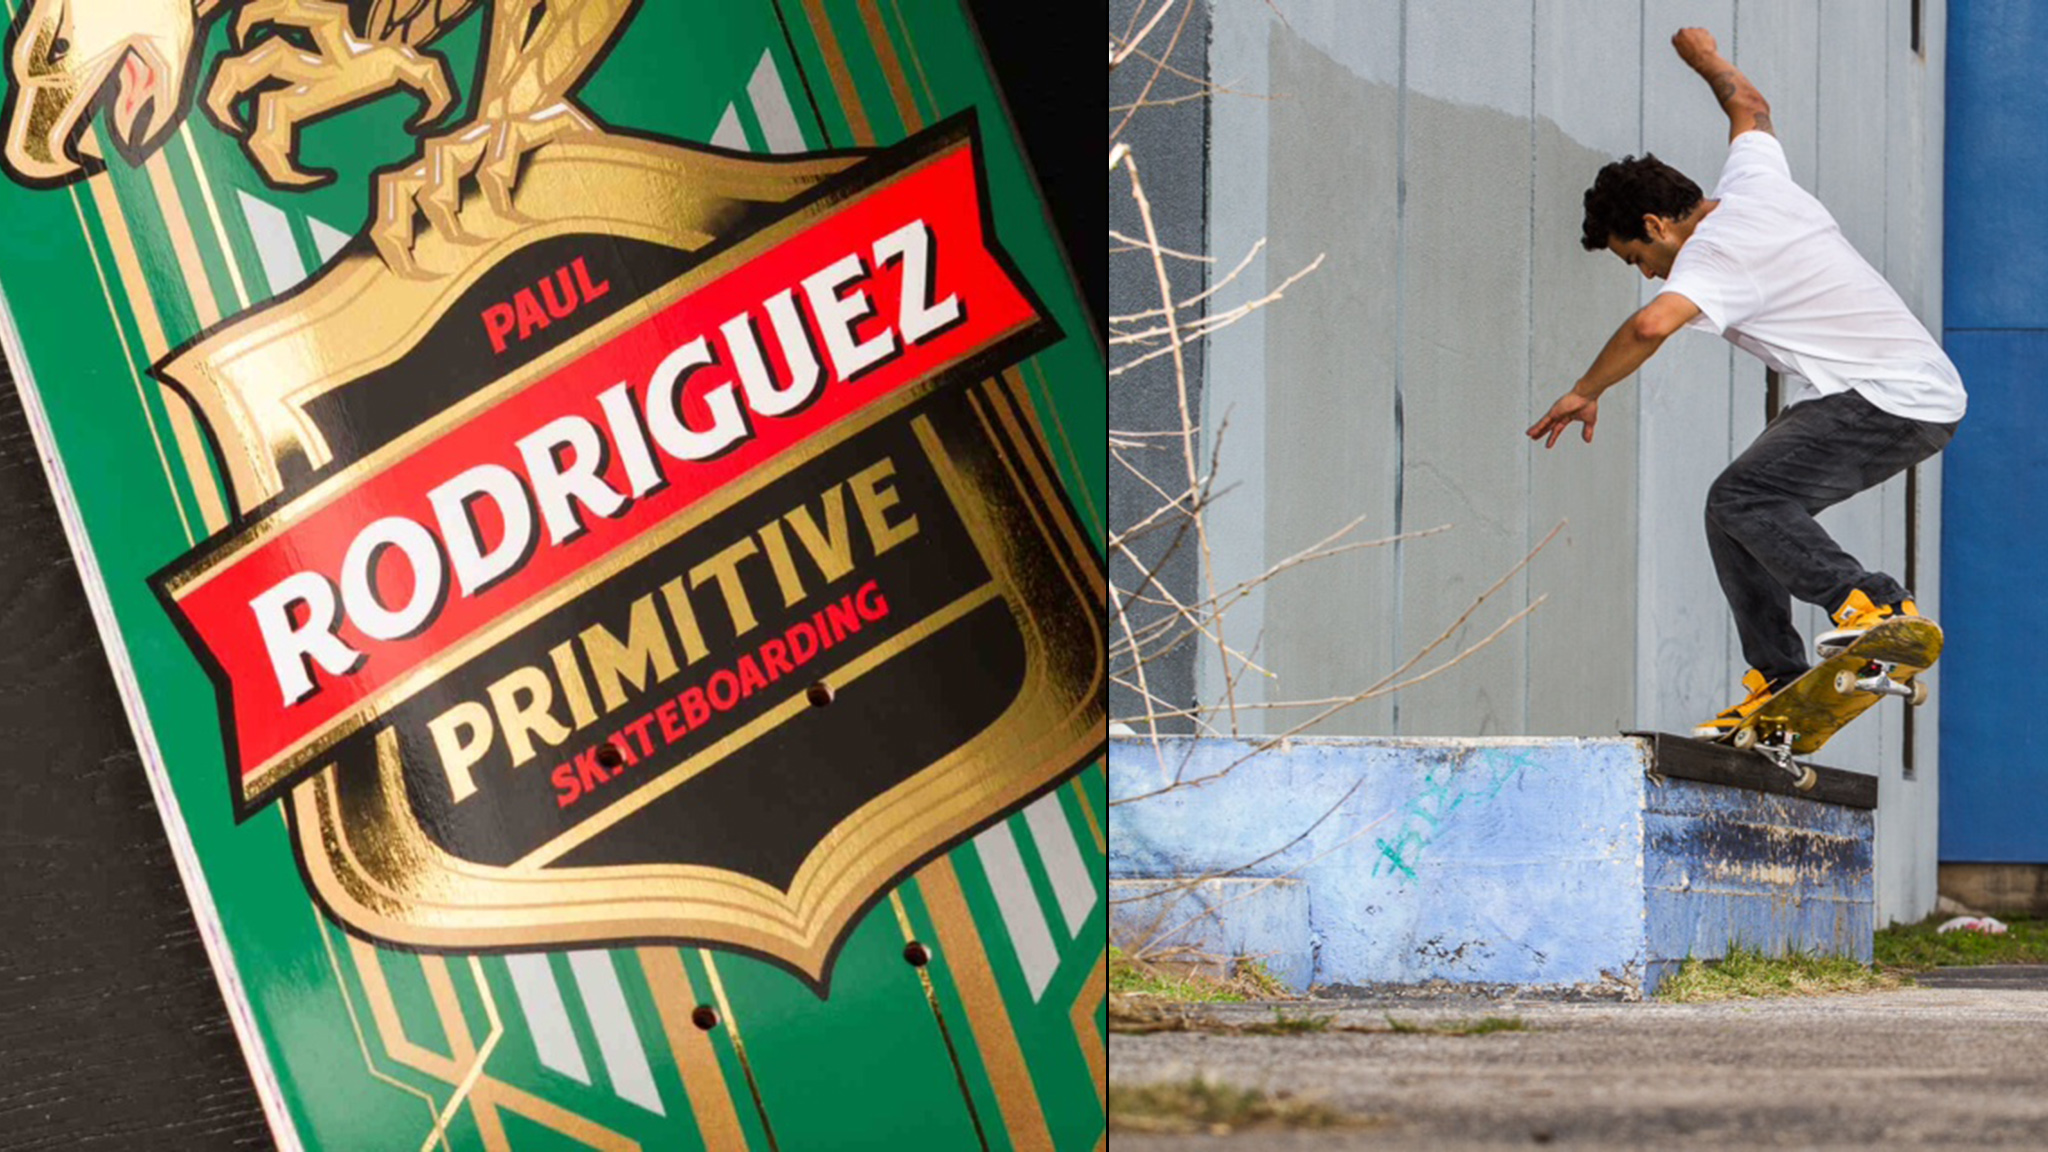 Rod S First Pro Model Deck From Primitive Skateboarding Left And A